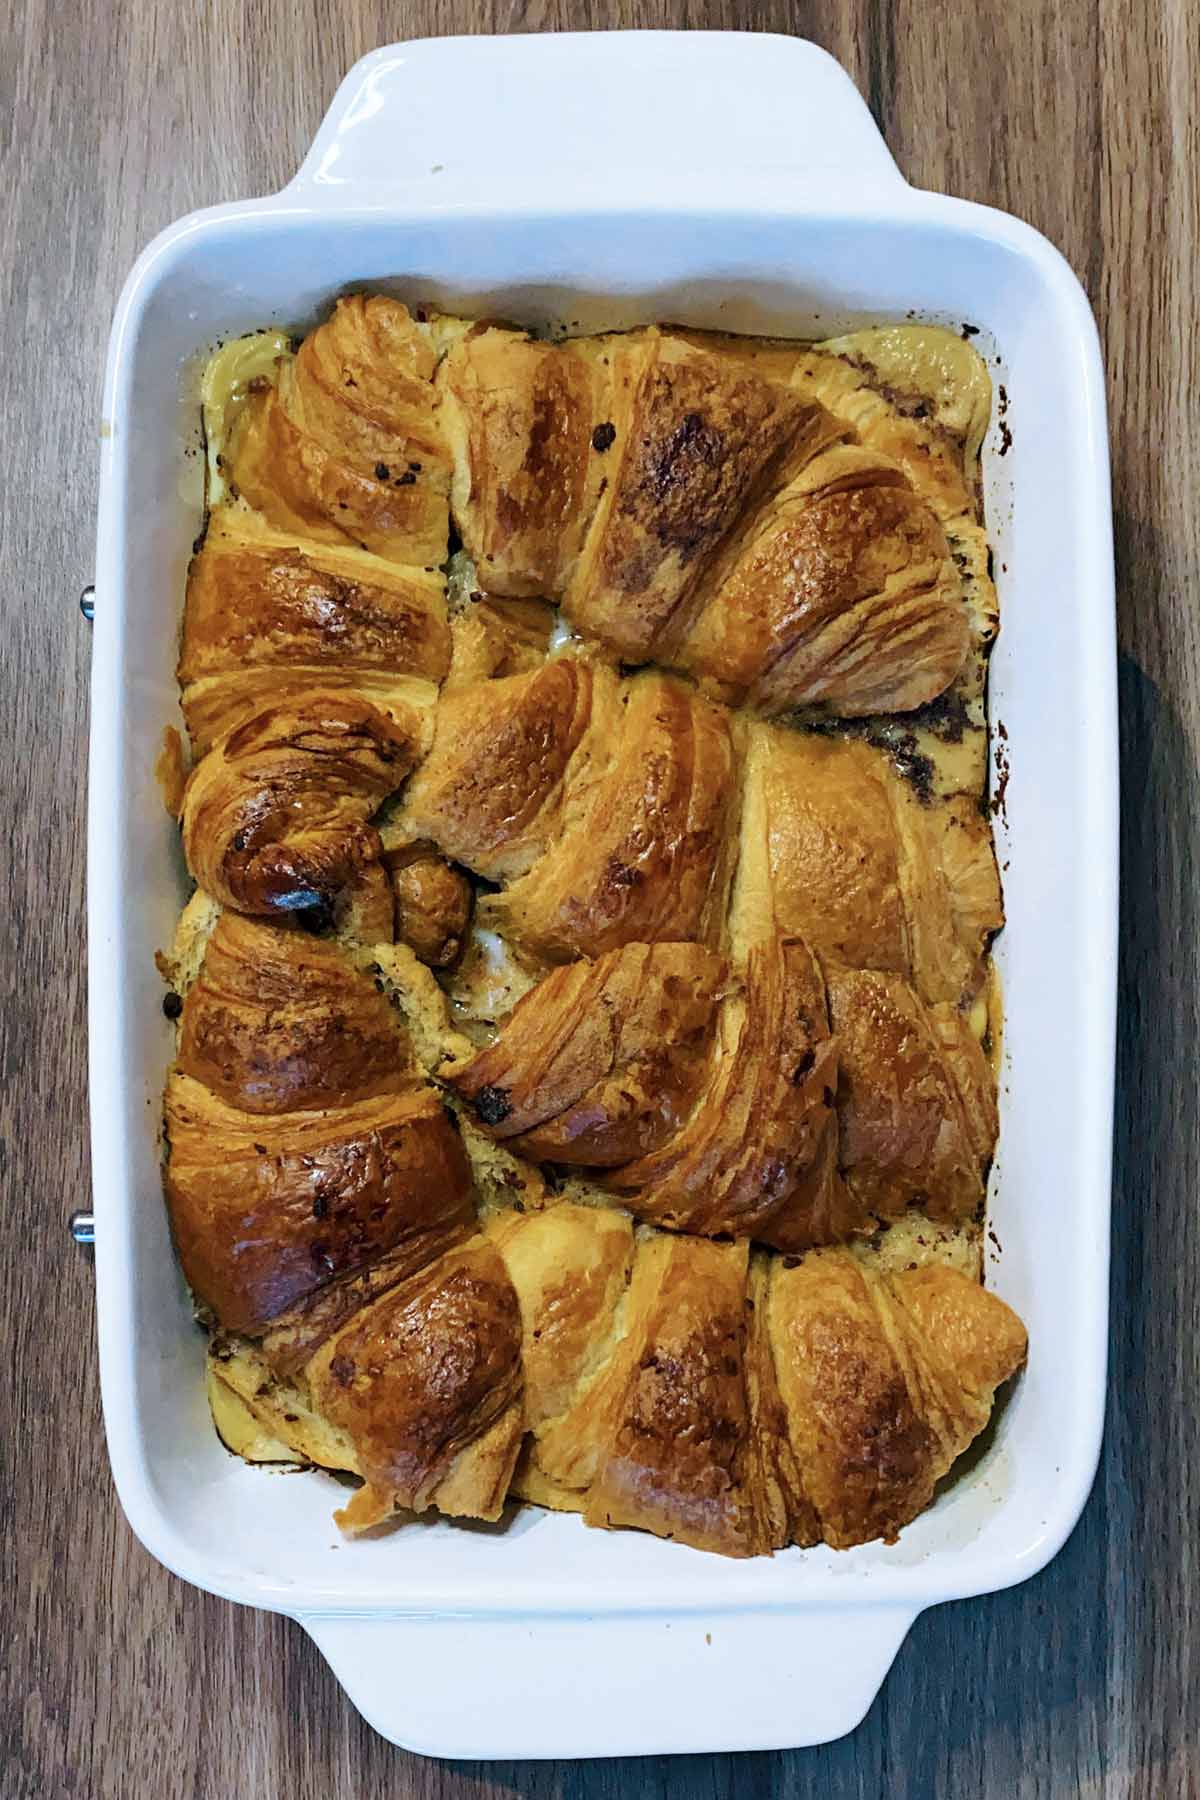 Baked croissants in a baking dish.